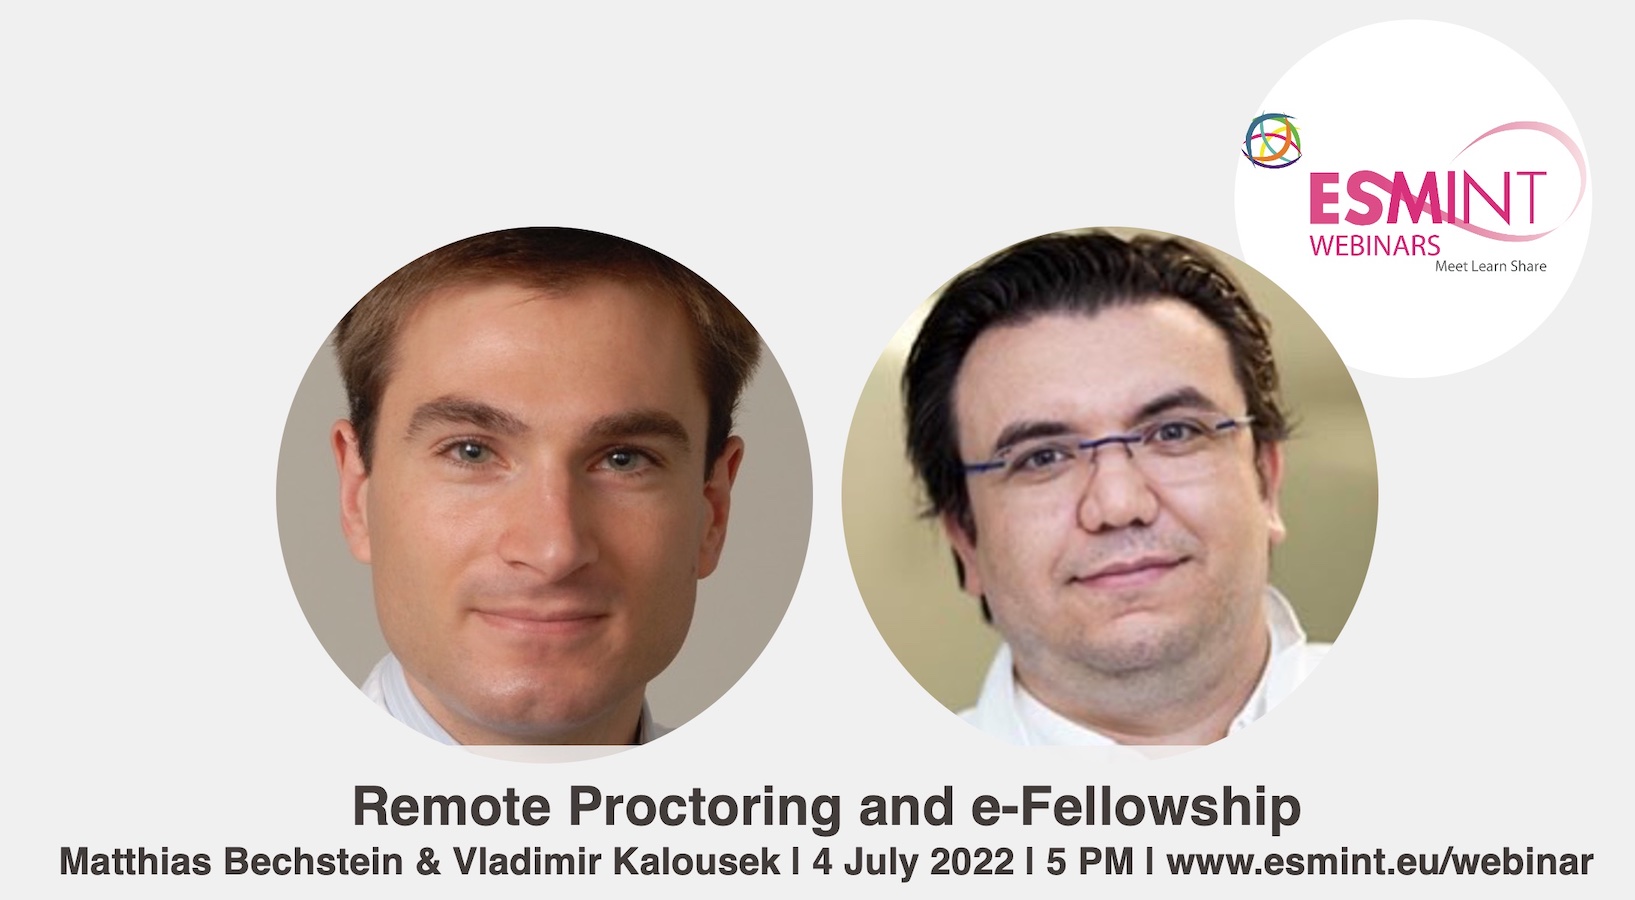 Webinar on Remote Proctoring with Dr. Bechstein and Dr. Kalousek.